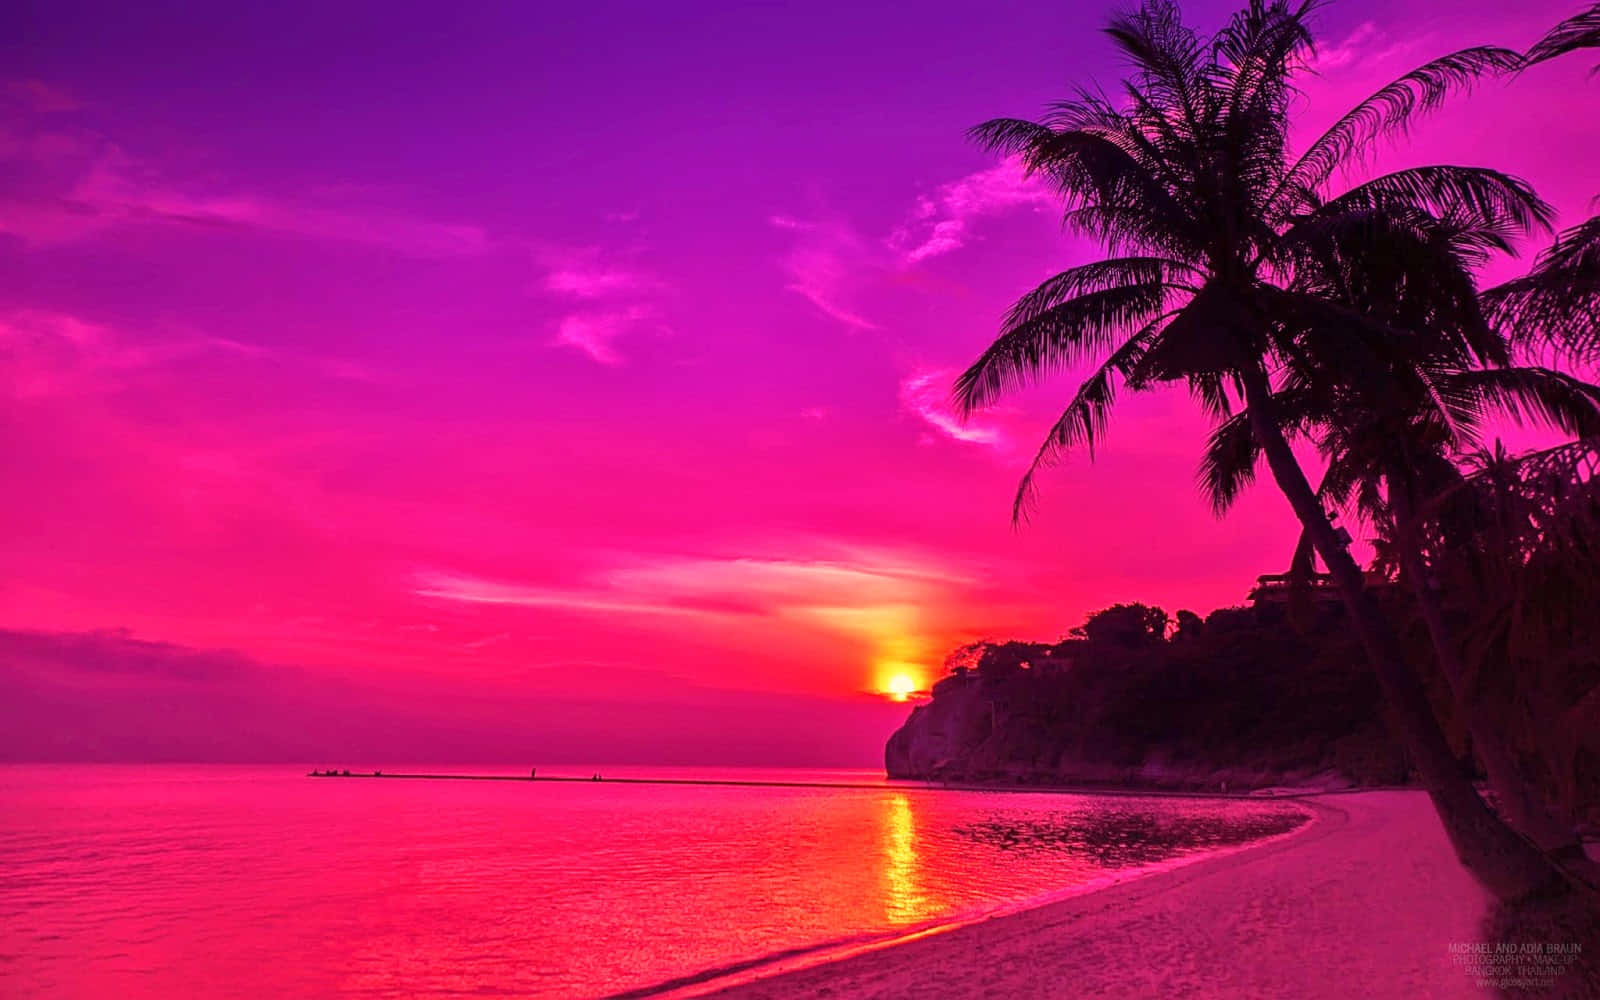 Witness the beauty of a breathtaking beach sunset